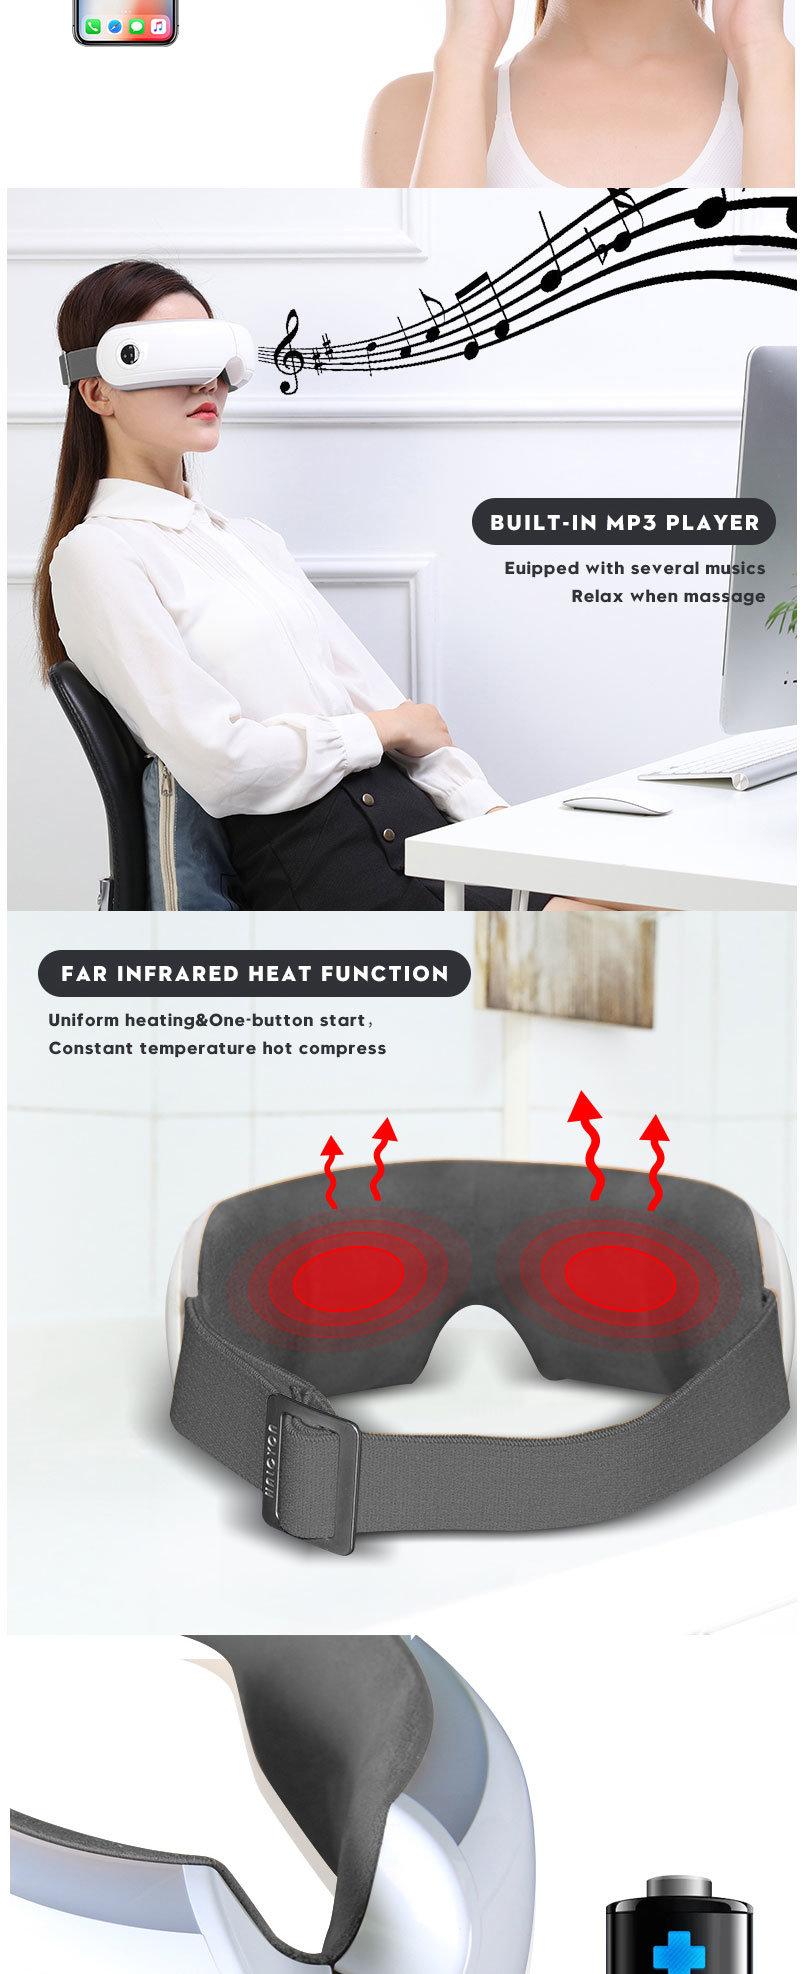 Hezheng Wireless Electric Vibration Eye Care Massager with Magnetic Heated